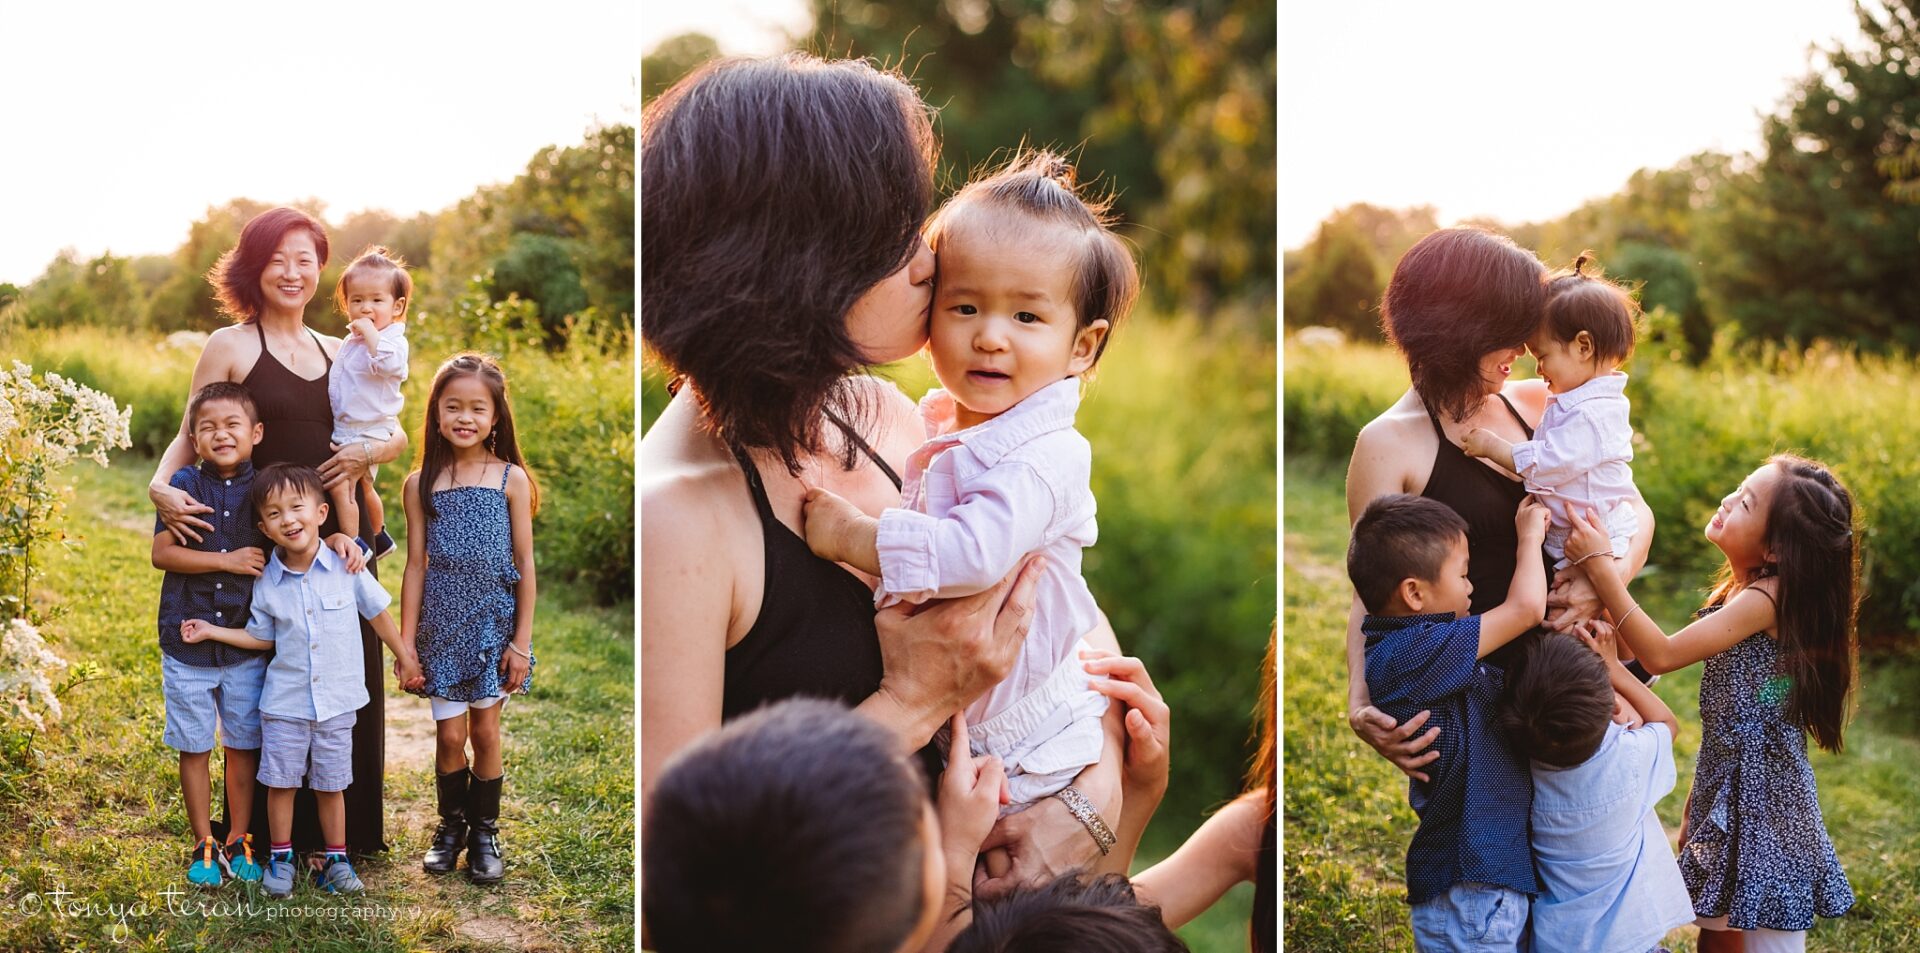 outdoor-family-photography-golden-hour-with-little-kids-md-lifestyle-photographer